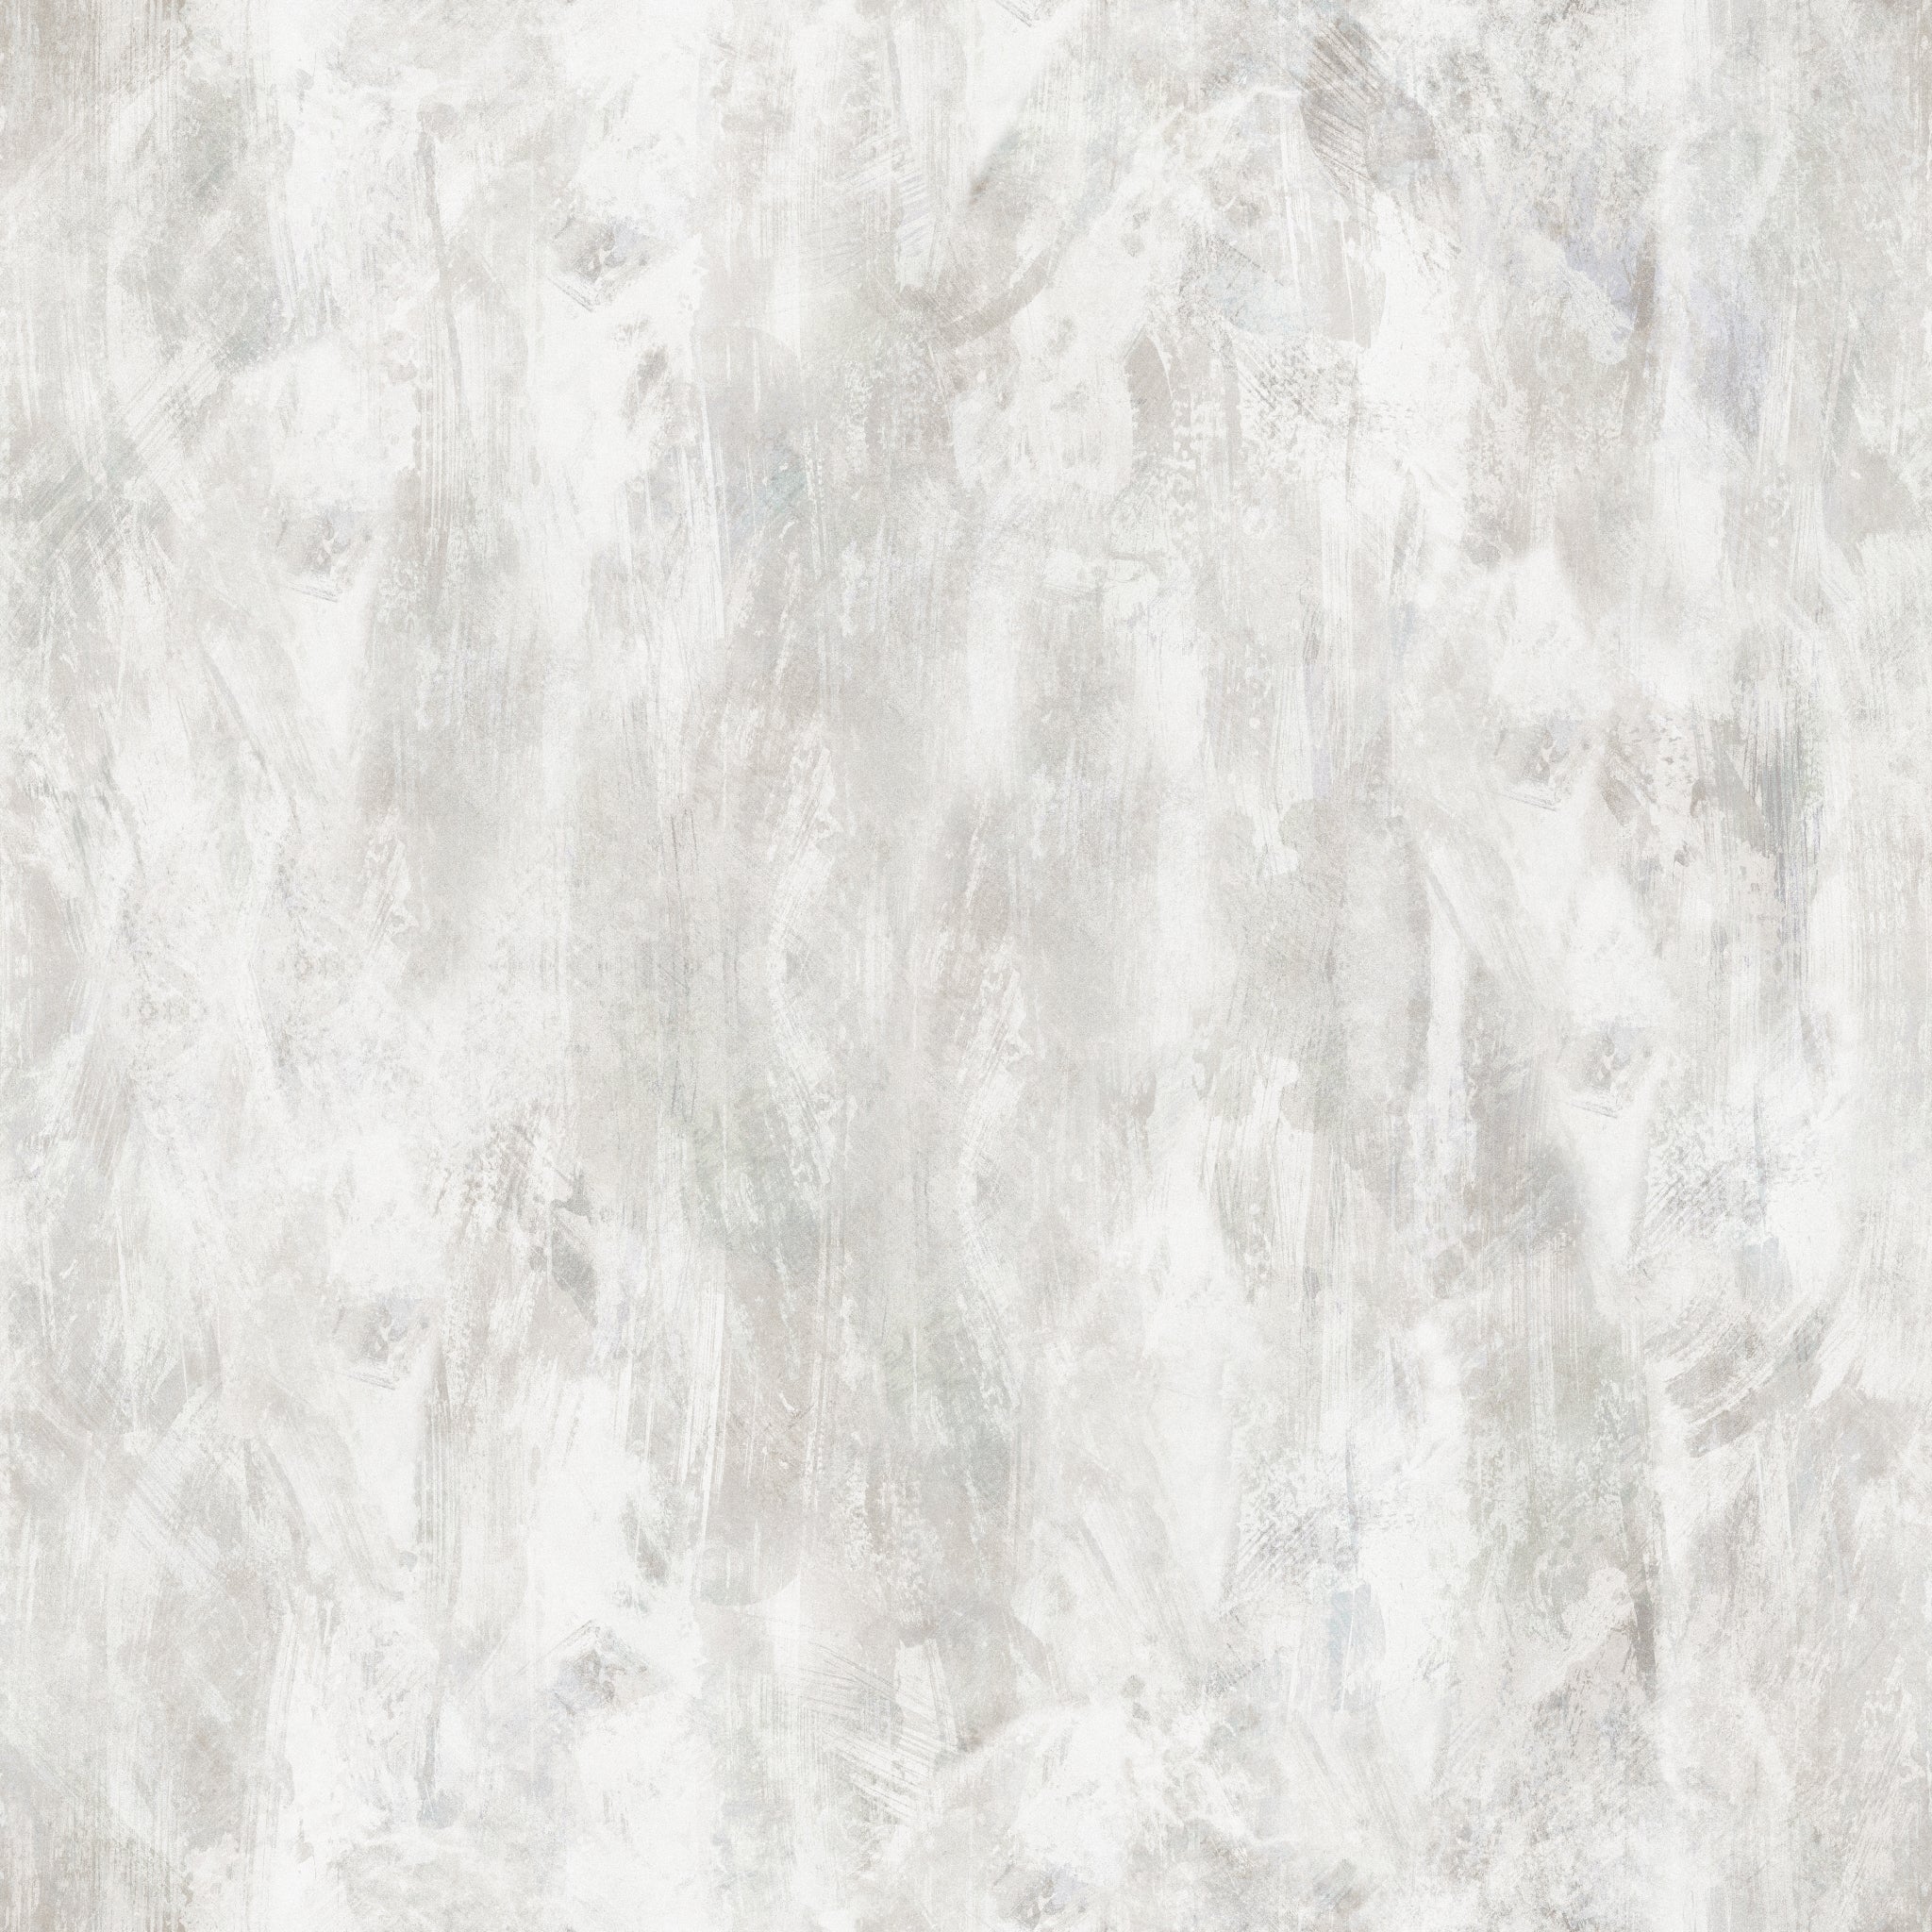 "Muse Wallpaper in elegant finish by Wall Blush, ideal for modern living room wall decor focus."